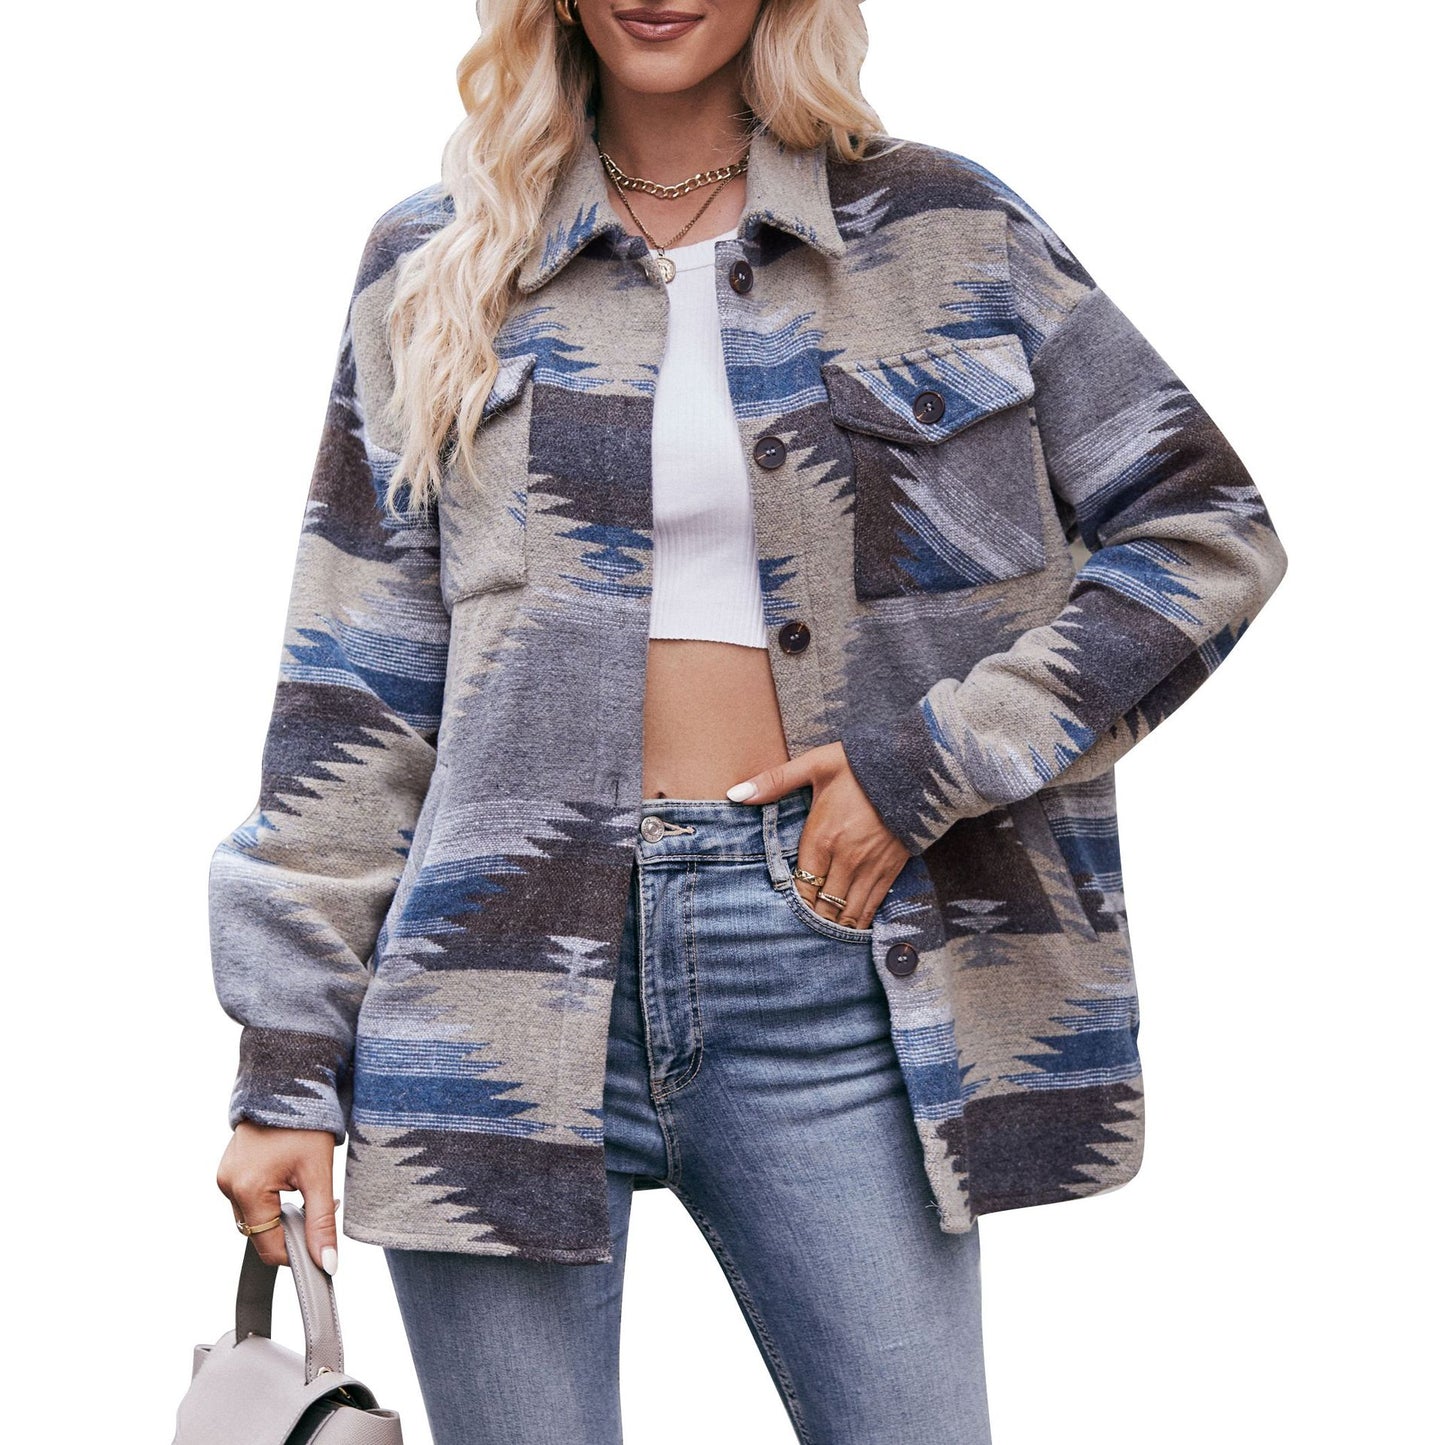 Geometric Print Jacket Shirt Winter Stand Collar Coats With Pockets Women's Outwear | GlamzLife